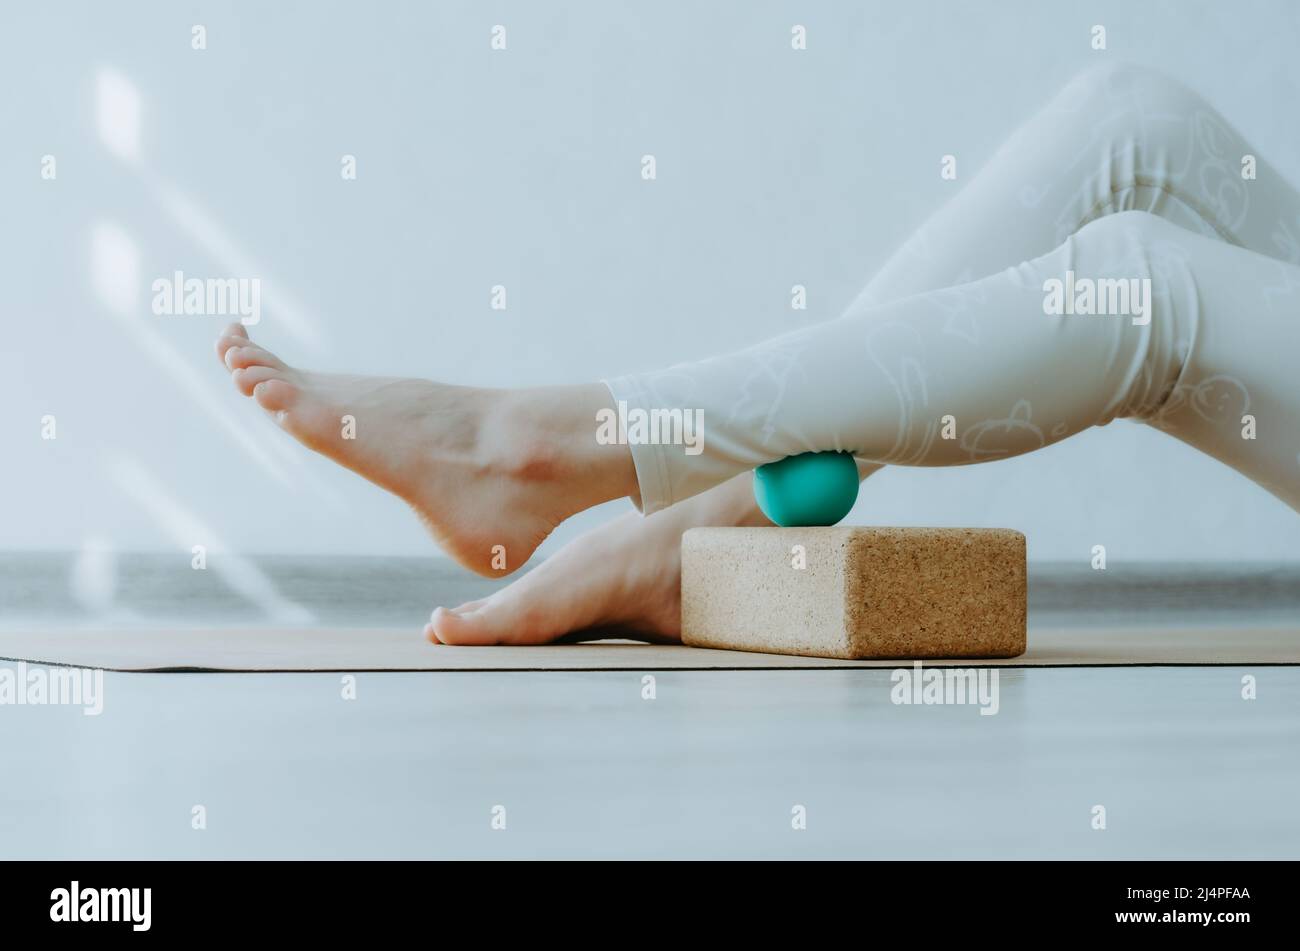 Calf muscle on therapy massage ball on cork block for myofascial release and hydration. Concept: self care practices at home, foot pain relief Stock Photo